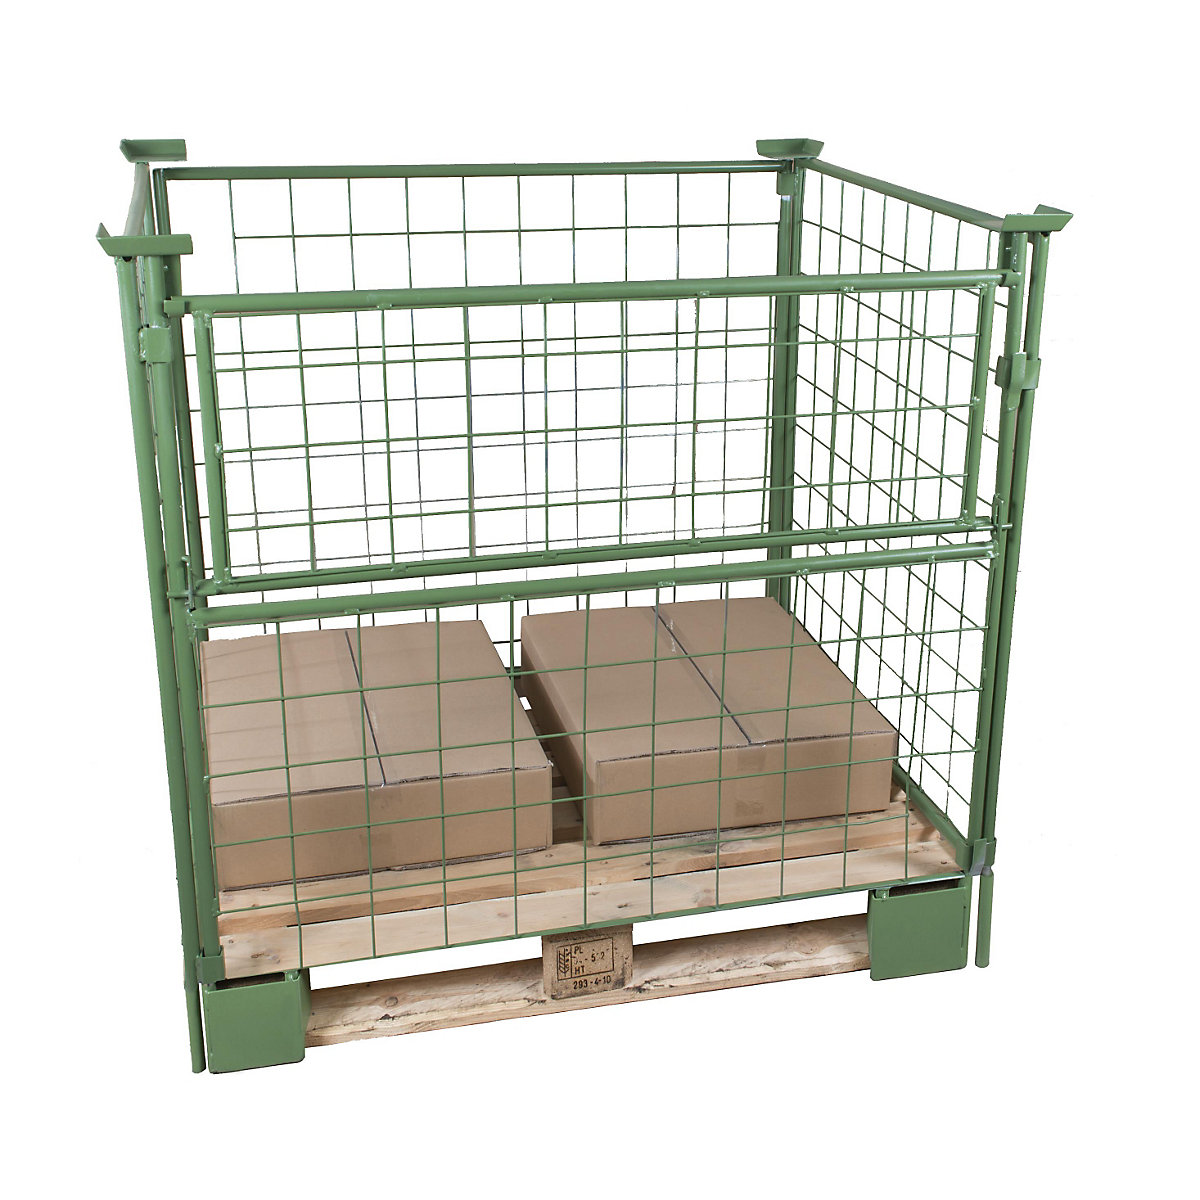 Pallet frame, effective height 1800 mm, for attaching, WxL 800 x 1200 mm, 1 long side can be half folded-2